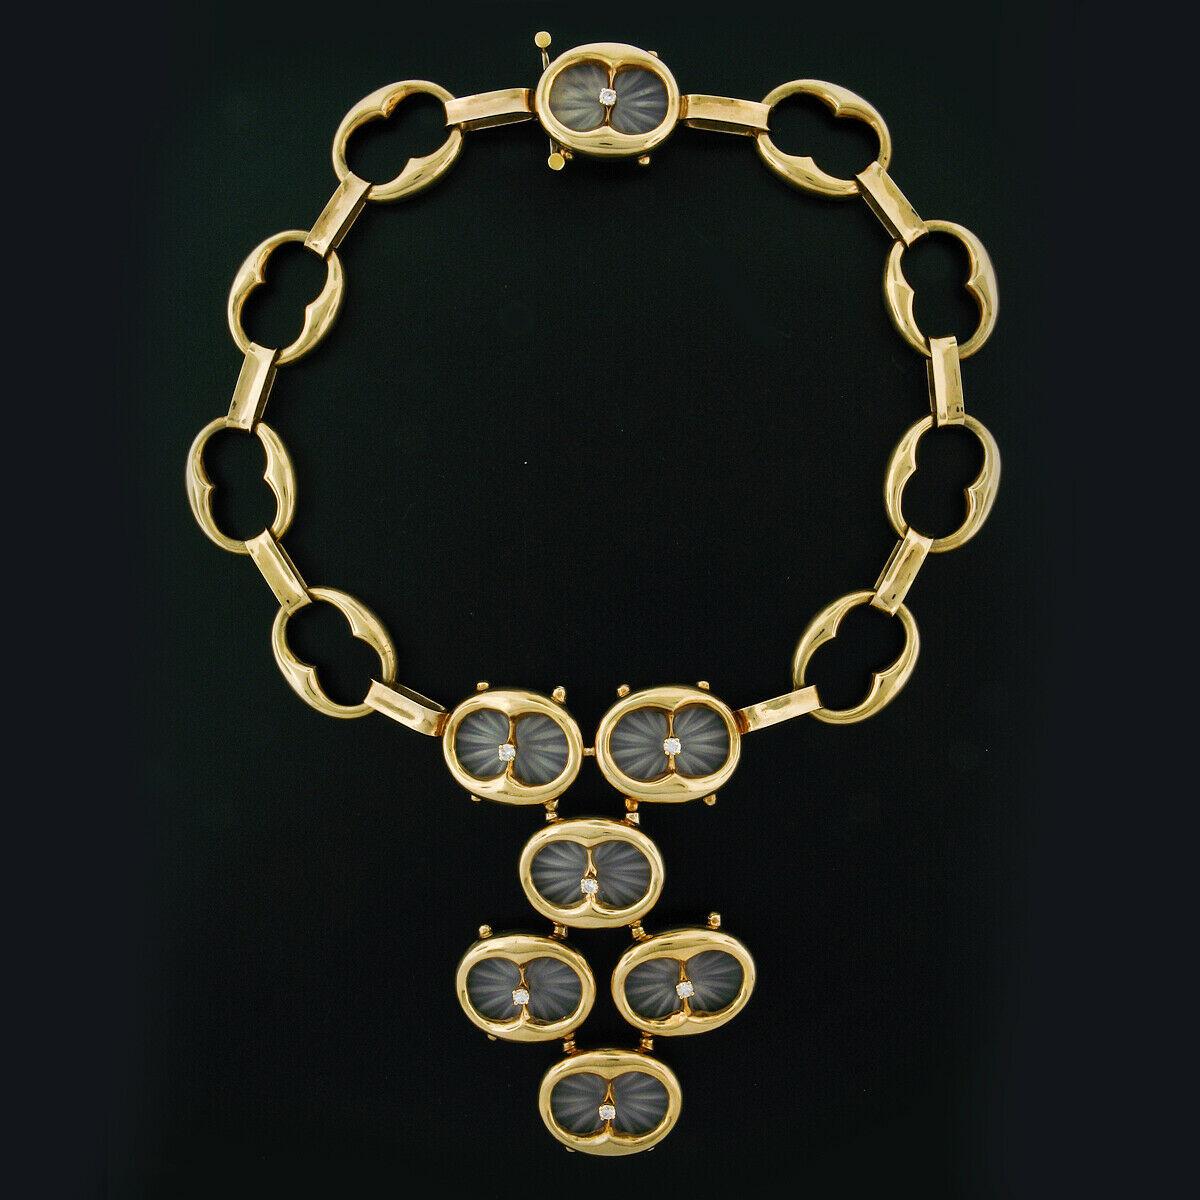 This large vintage statement piece was very well crafted from solid 14k yellow gold and features numerous pieces of etched camphor glass accented by top quality diamonds throughout. The necklace is structured from solid, open, oval shaped links that